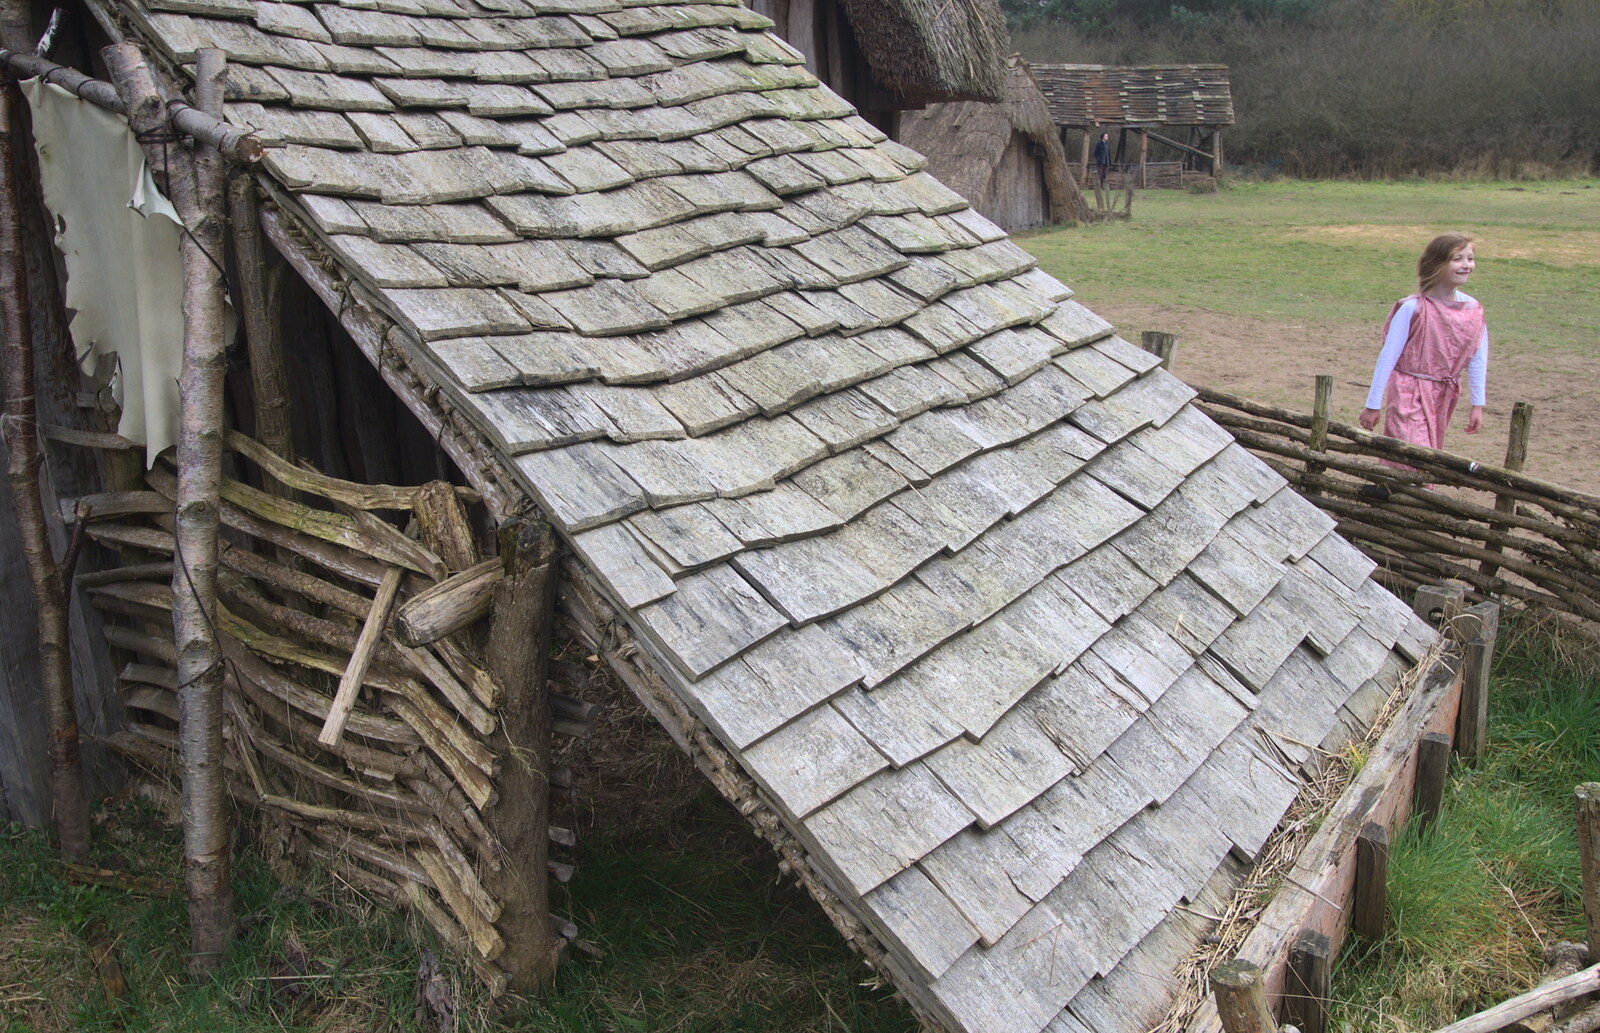 Wooden shingles on a roof from An Anglo-Saxon Village, West Stow, Suffolk - 19th February 2017